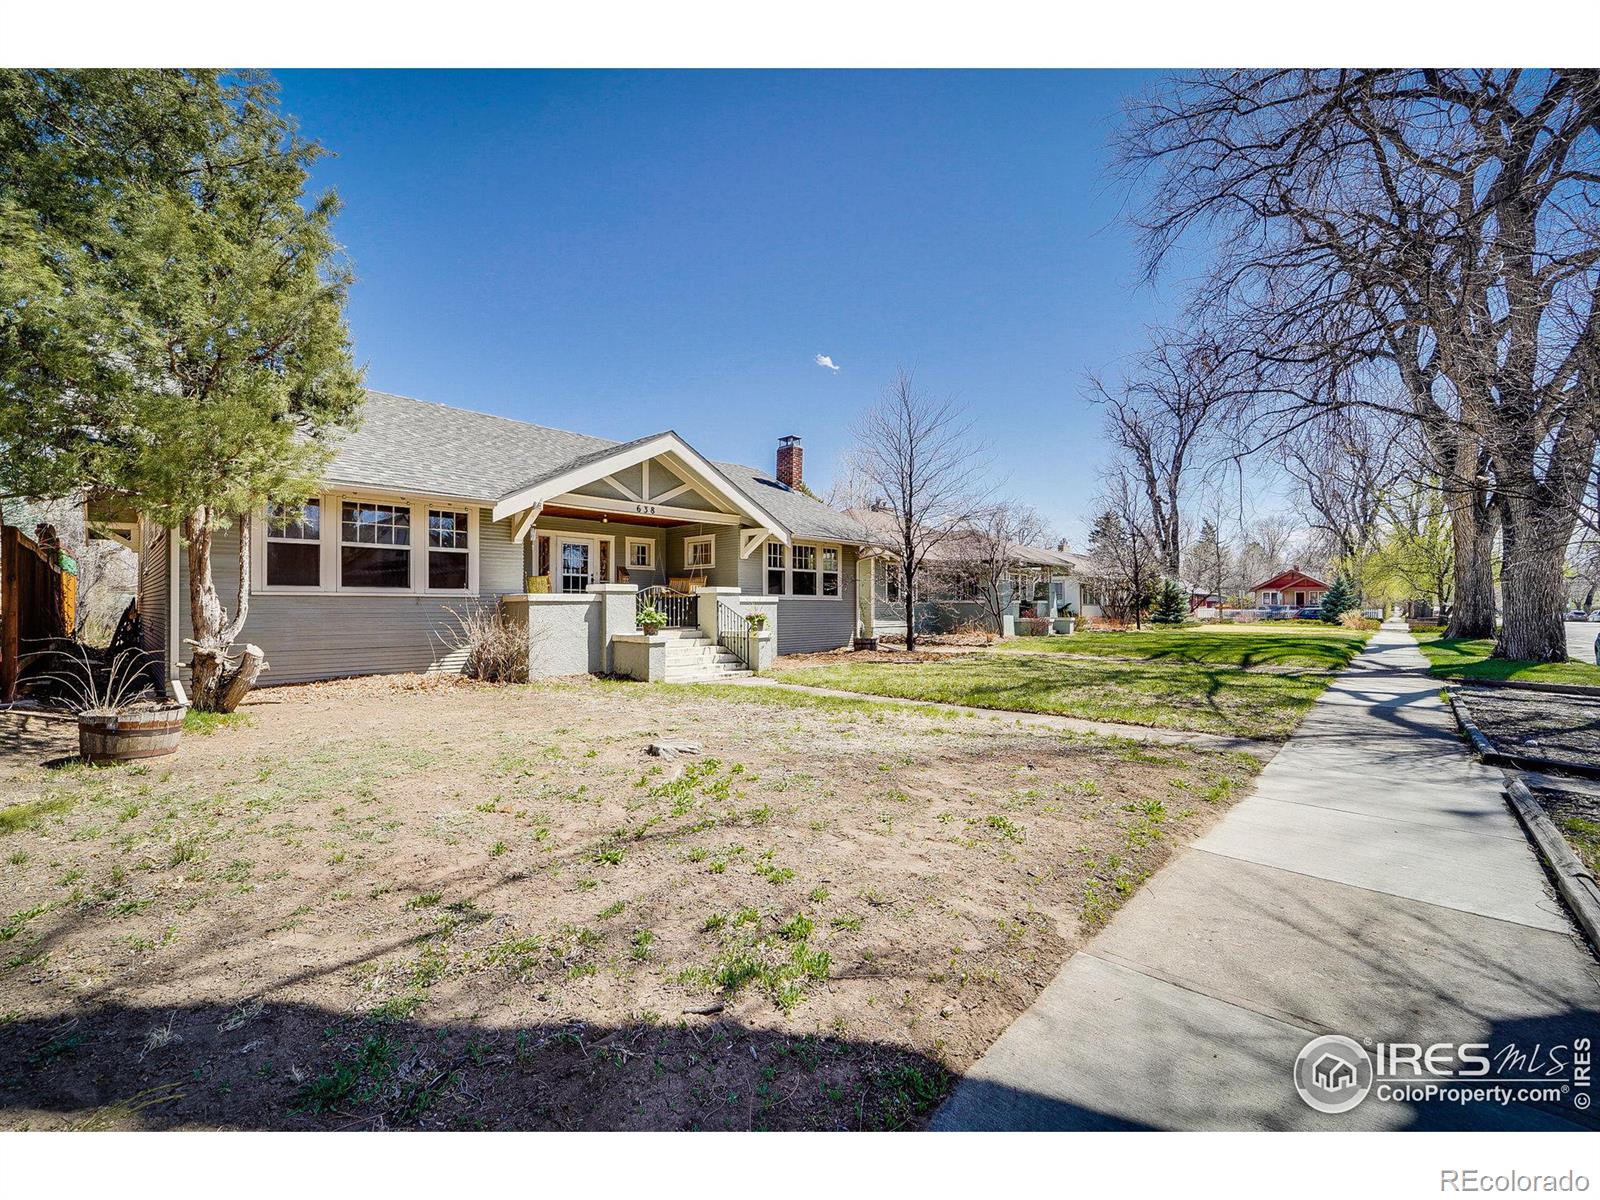 Report Image for 638  Whedbee Street,Fort Collins, Colorado